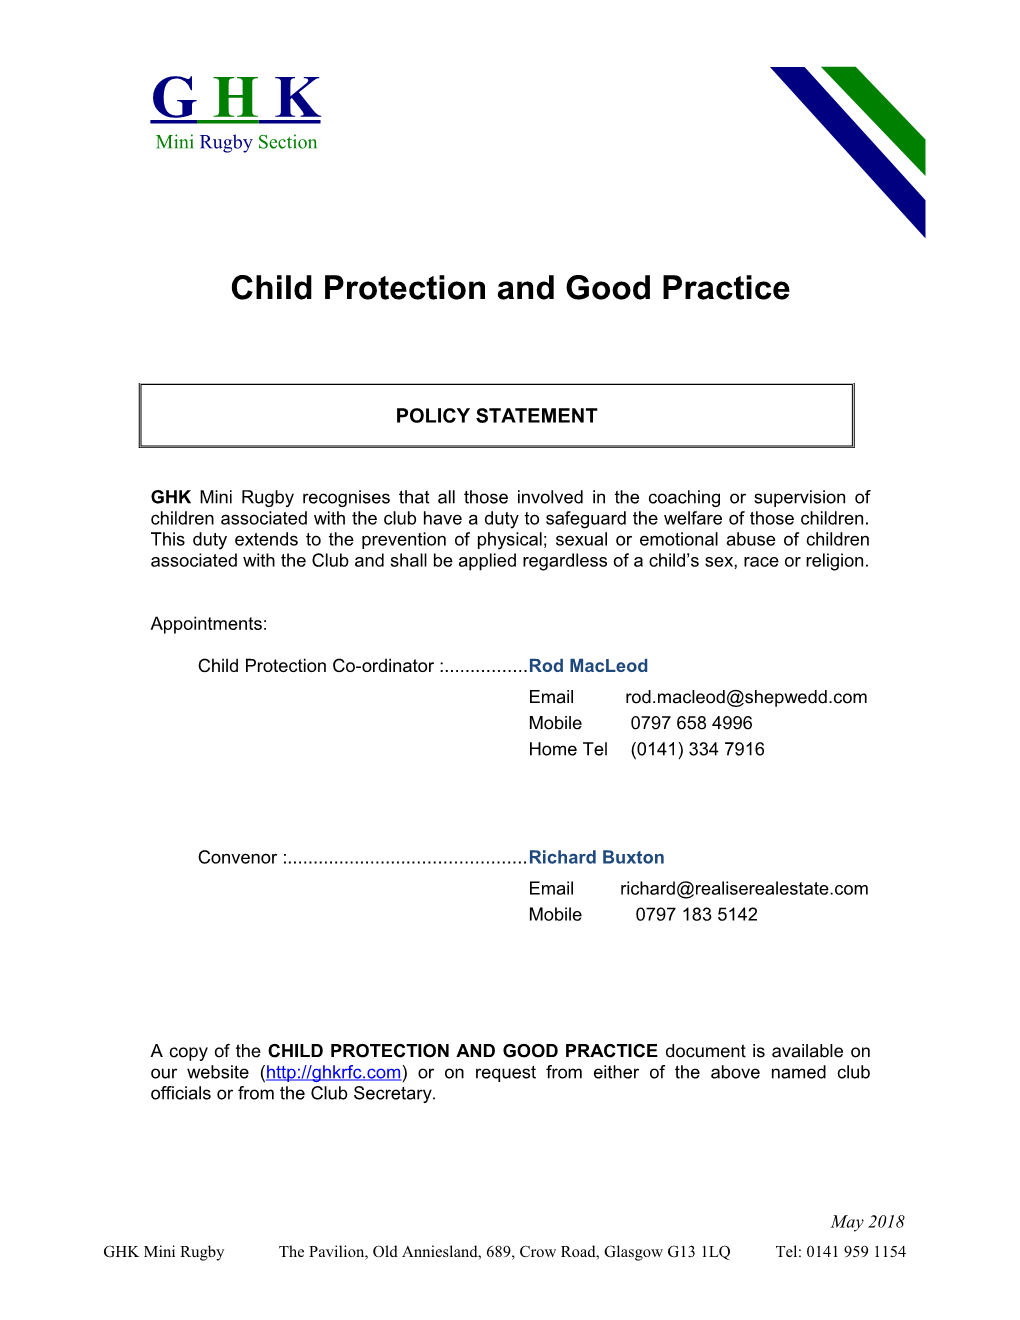 Child Protection and Good Practice